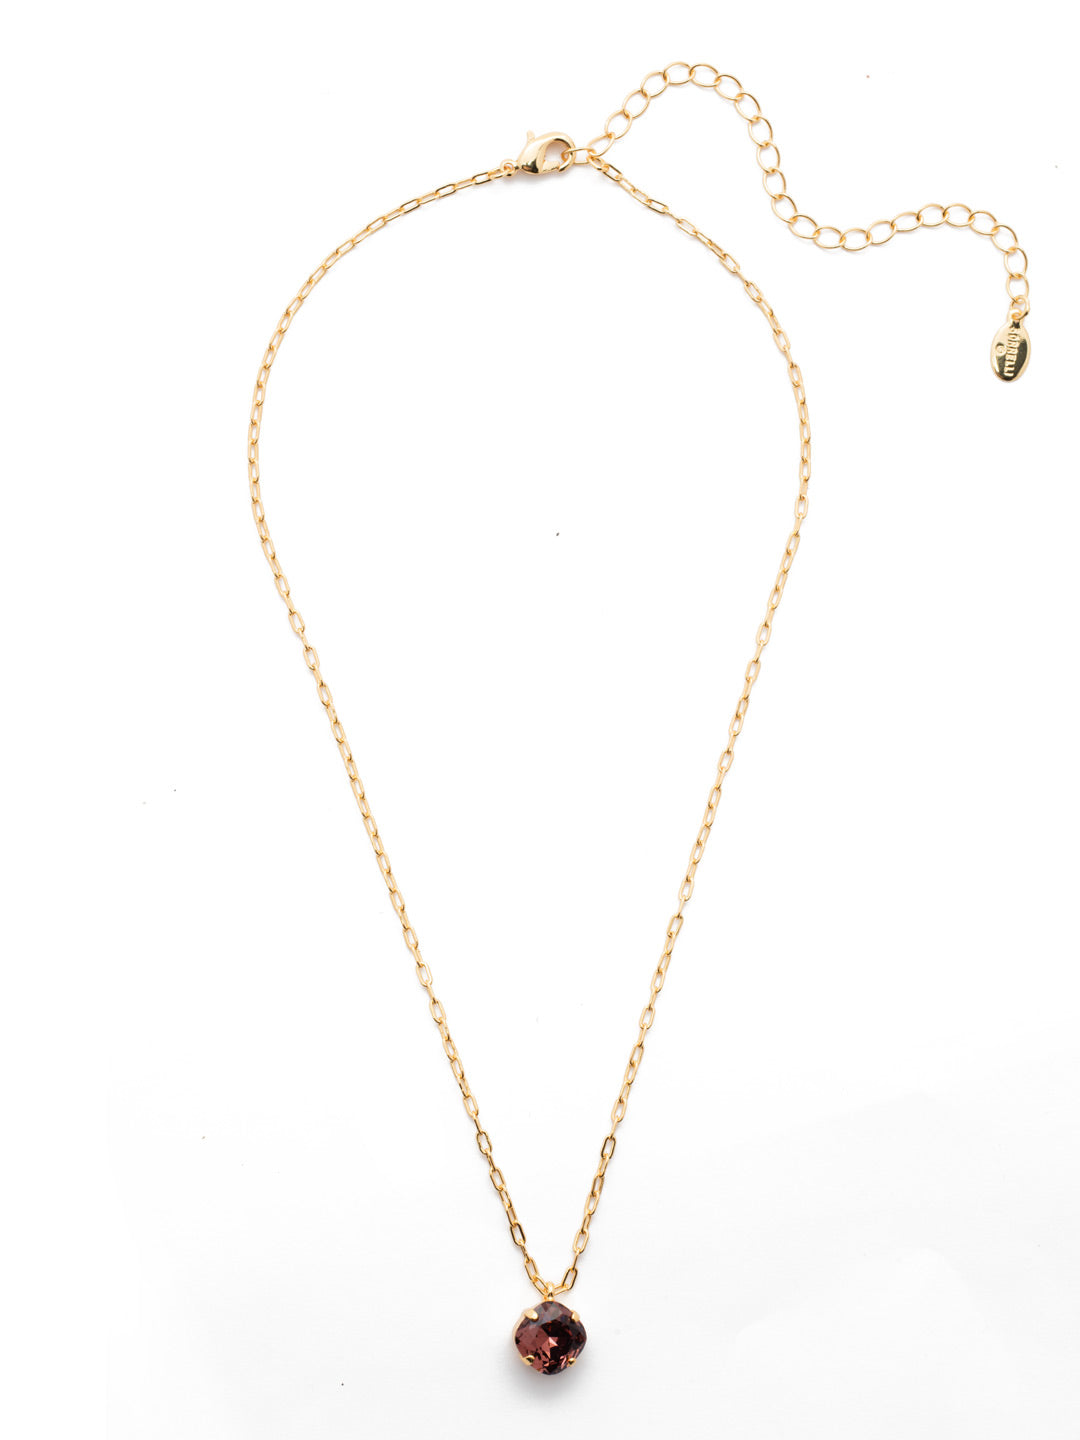 Siren Pendant Necklace - NEP22BGBUR - <p>With a cushion-cut crystal and delicate chain, the Siren Pendant  will add a litle sparkle to your everyday look. From Sorrelli's Burgundy collection in our Bright Gold-tone finish.</p>